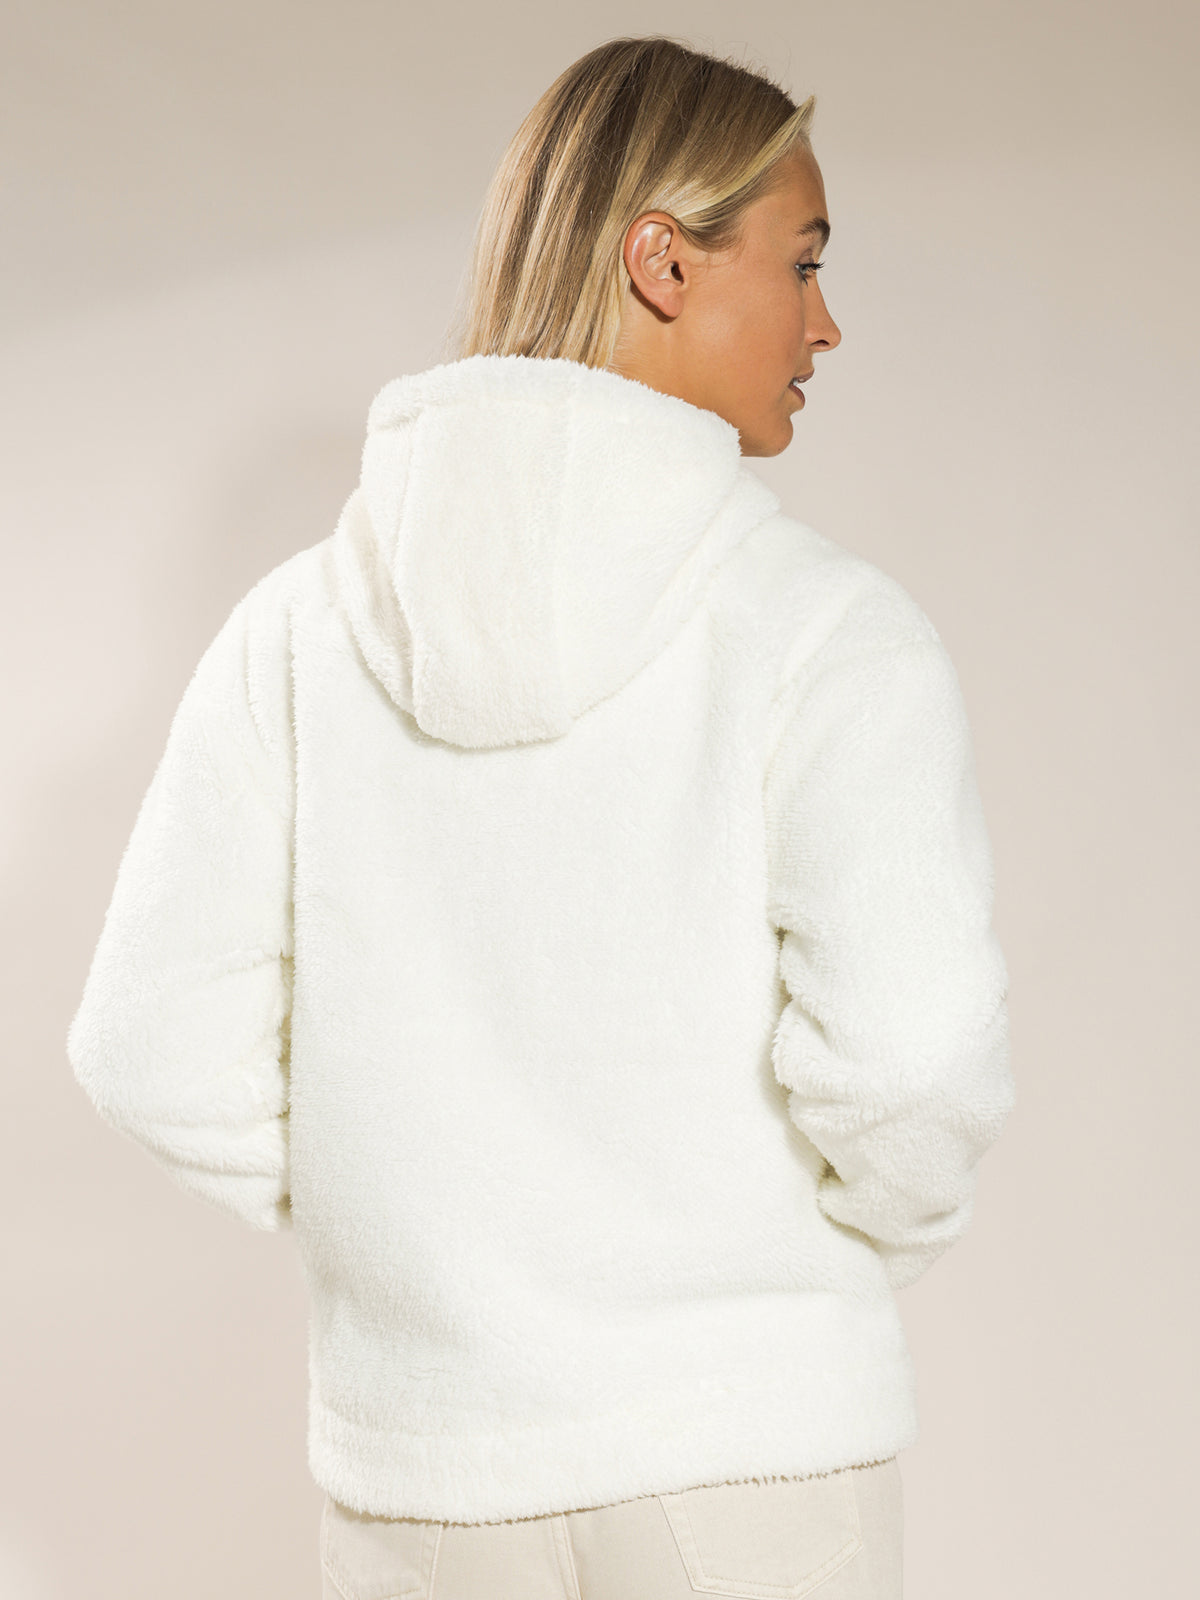 Teddy Long Popover Hoodie in White